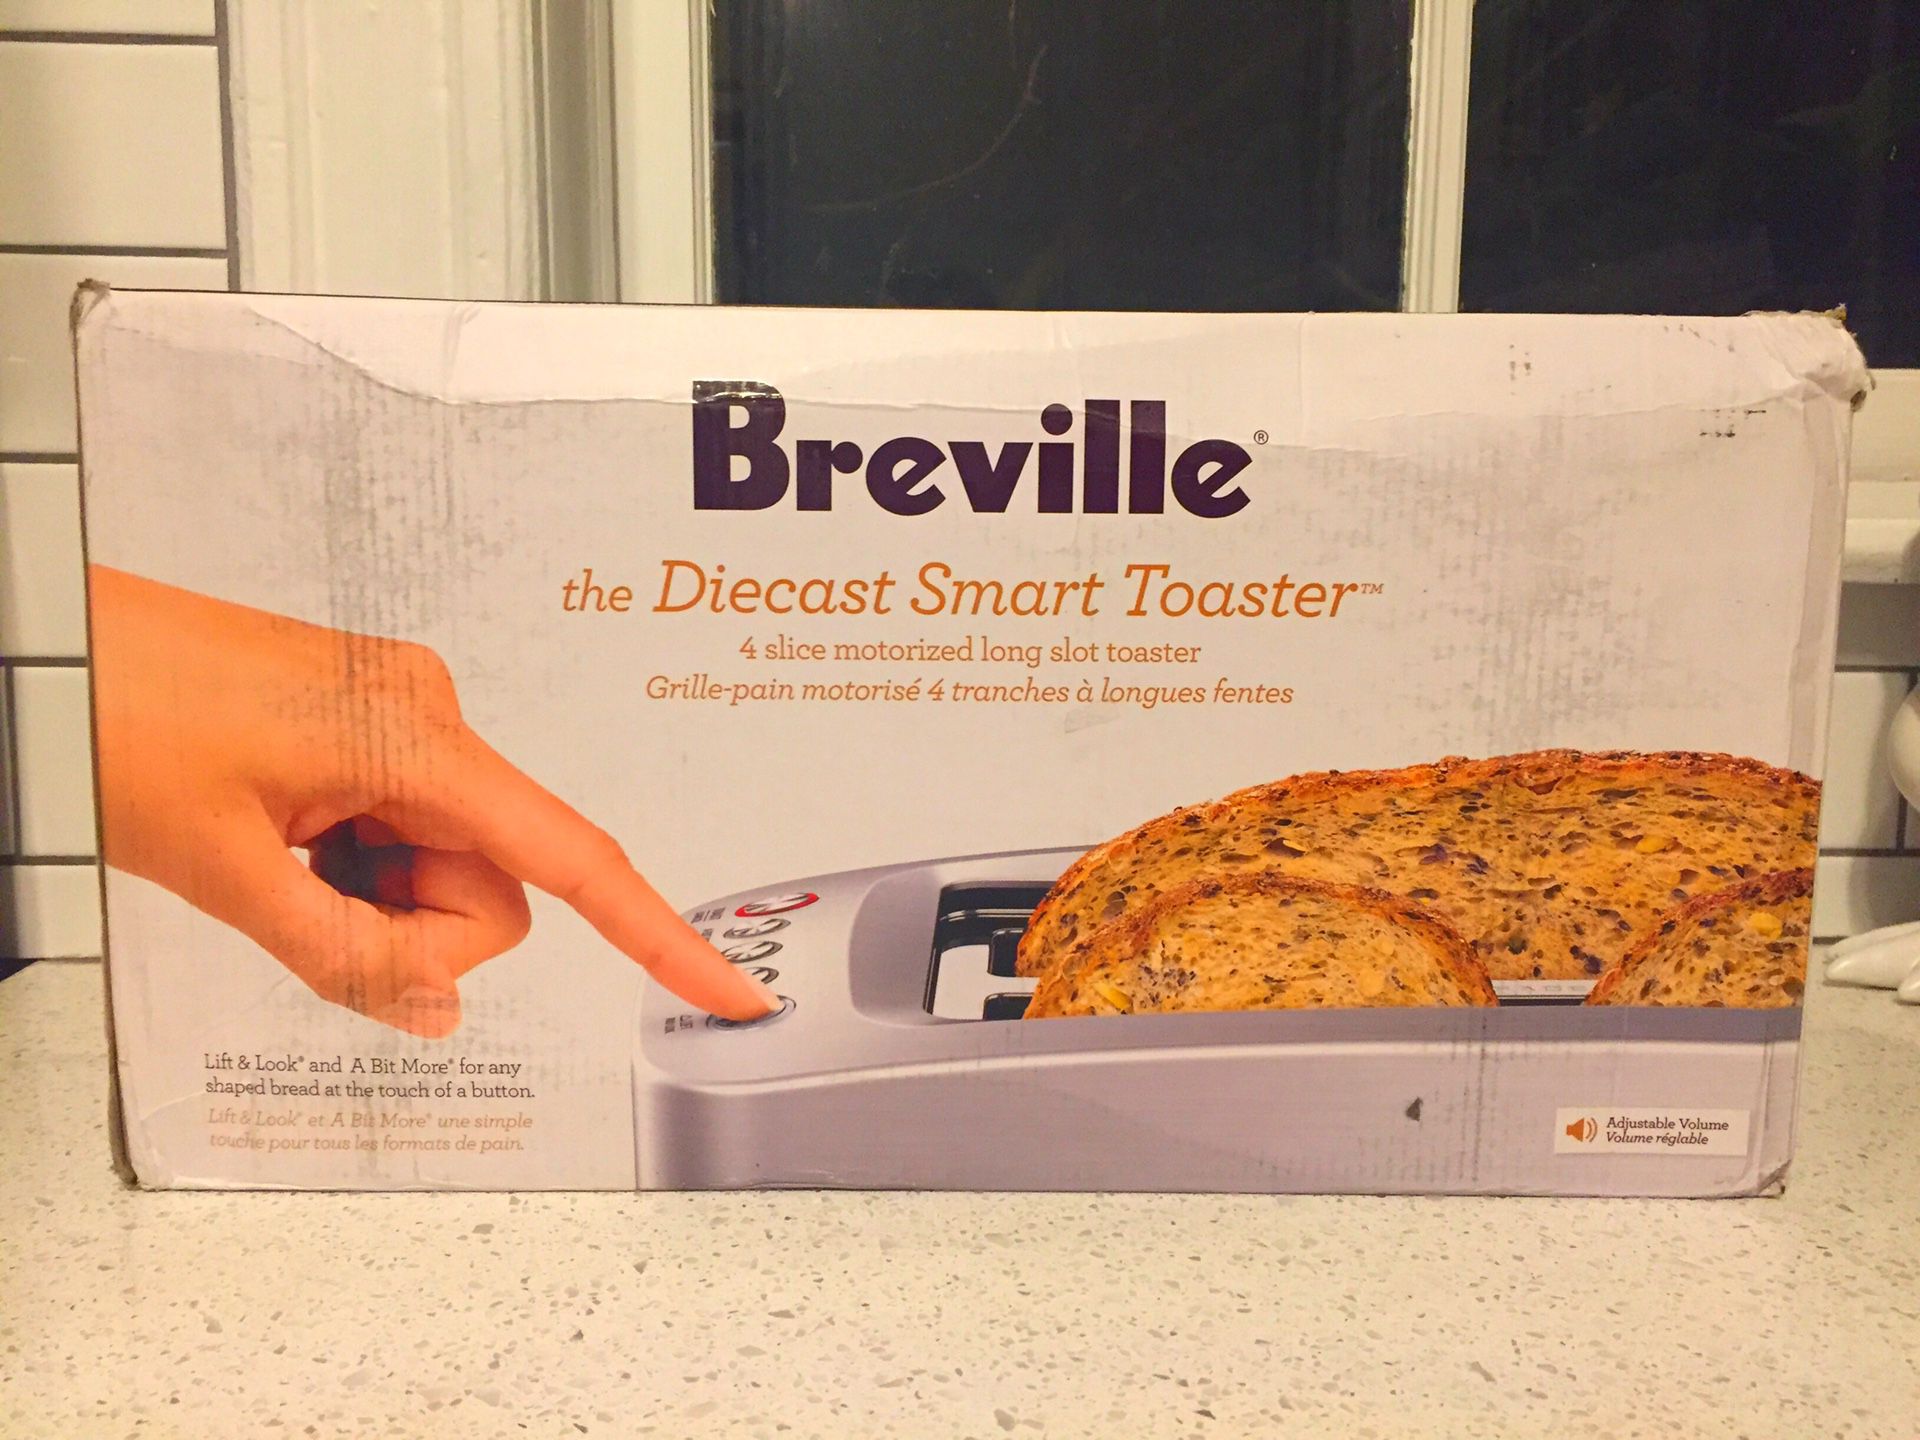 Breville the Diecast Smart Toaster 4 slice motorized long slot toaster. New in Box. Retails for $180